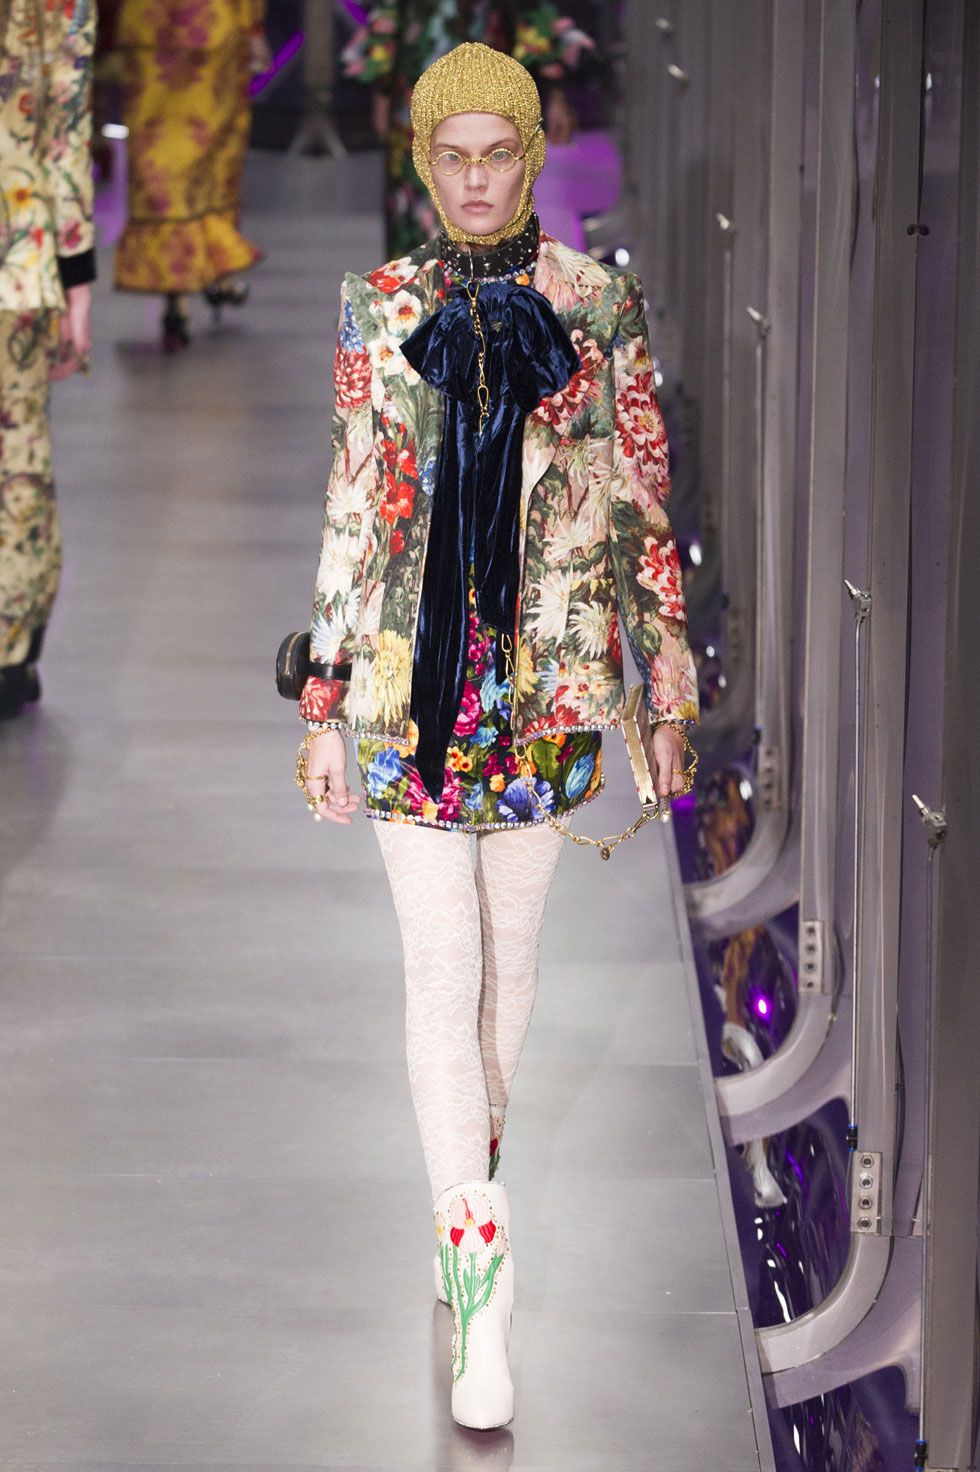 119 Looks From Gucci Fall MFW Show - Runway at Milan Fashion Week